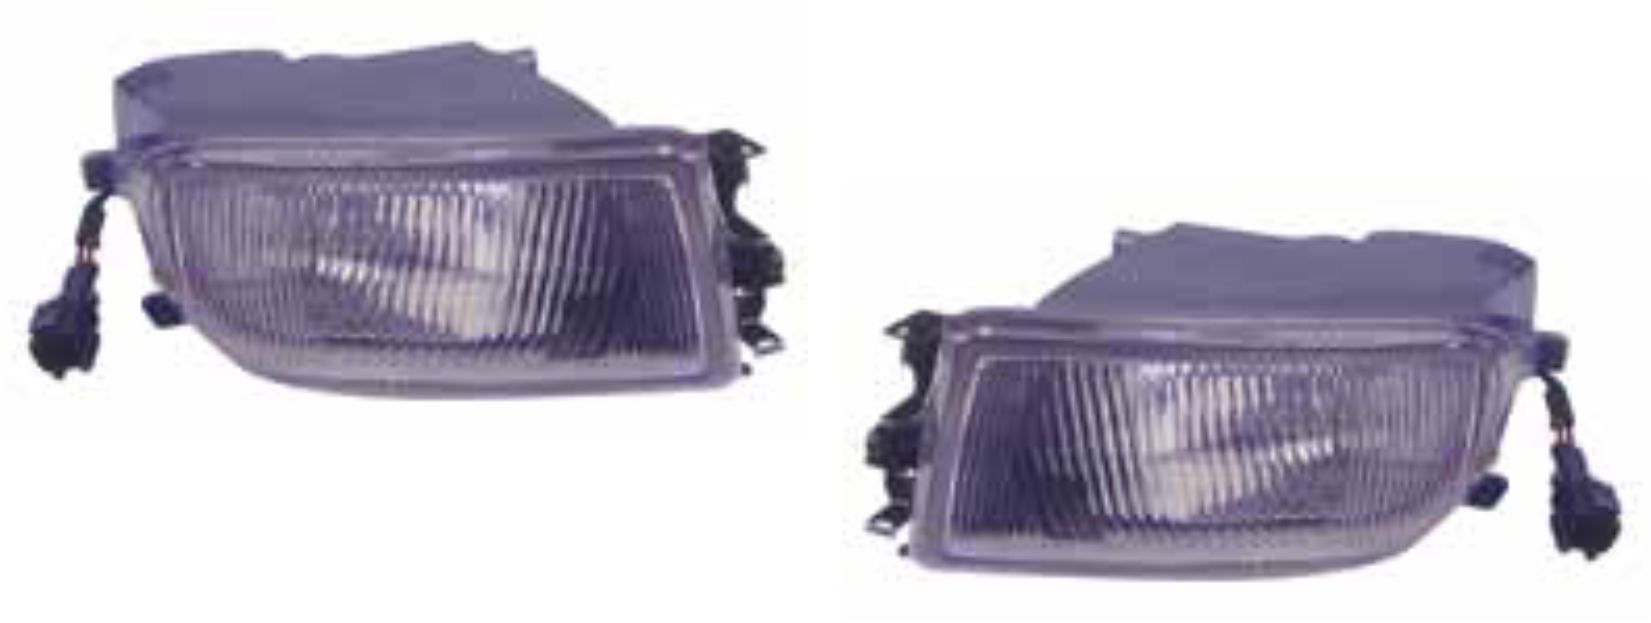 FGL500689 - B14 96 FROSTED FOG LAMP (PAIR)...2004162